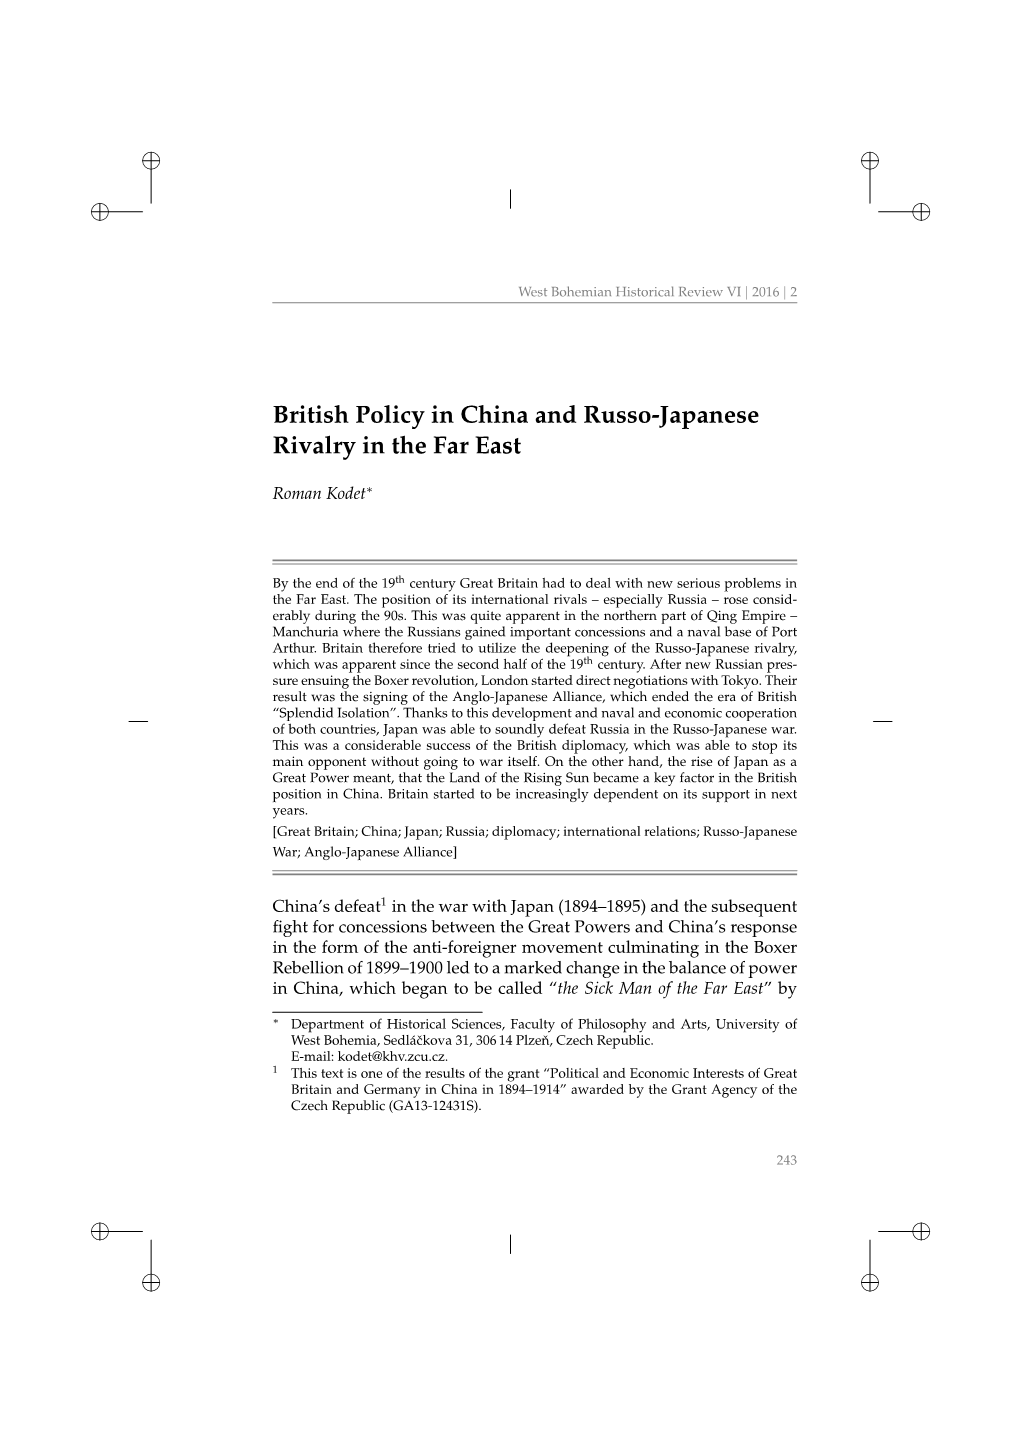 British Policy in China and Russo-Japanese Rivalry in the Far East